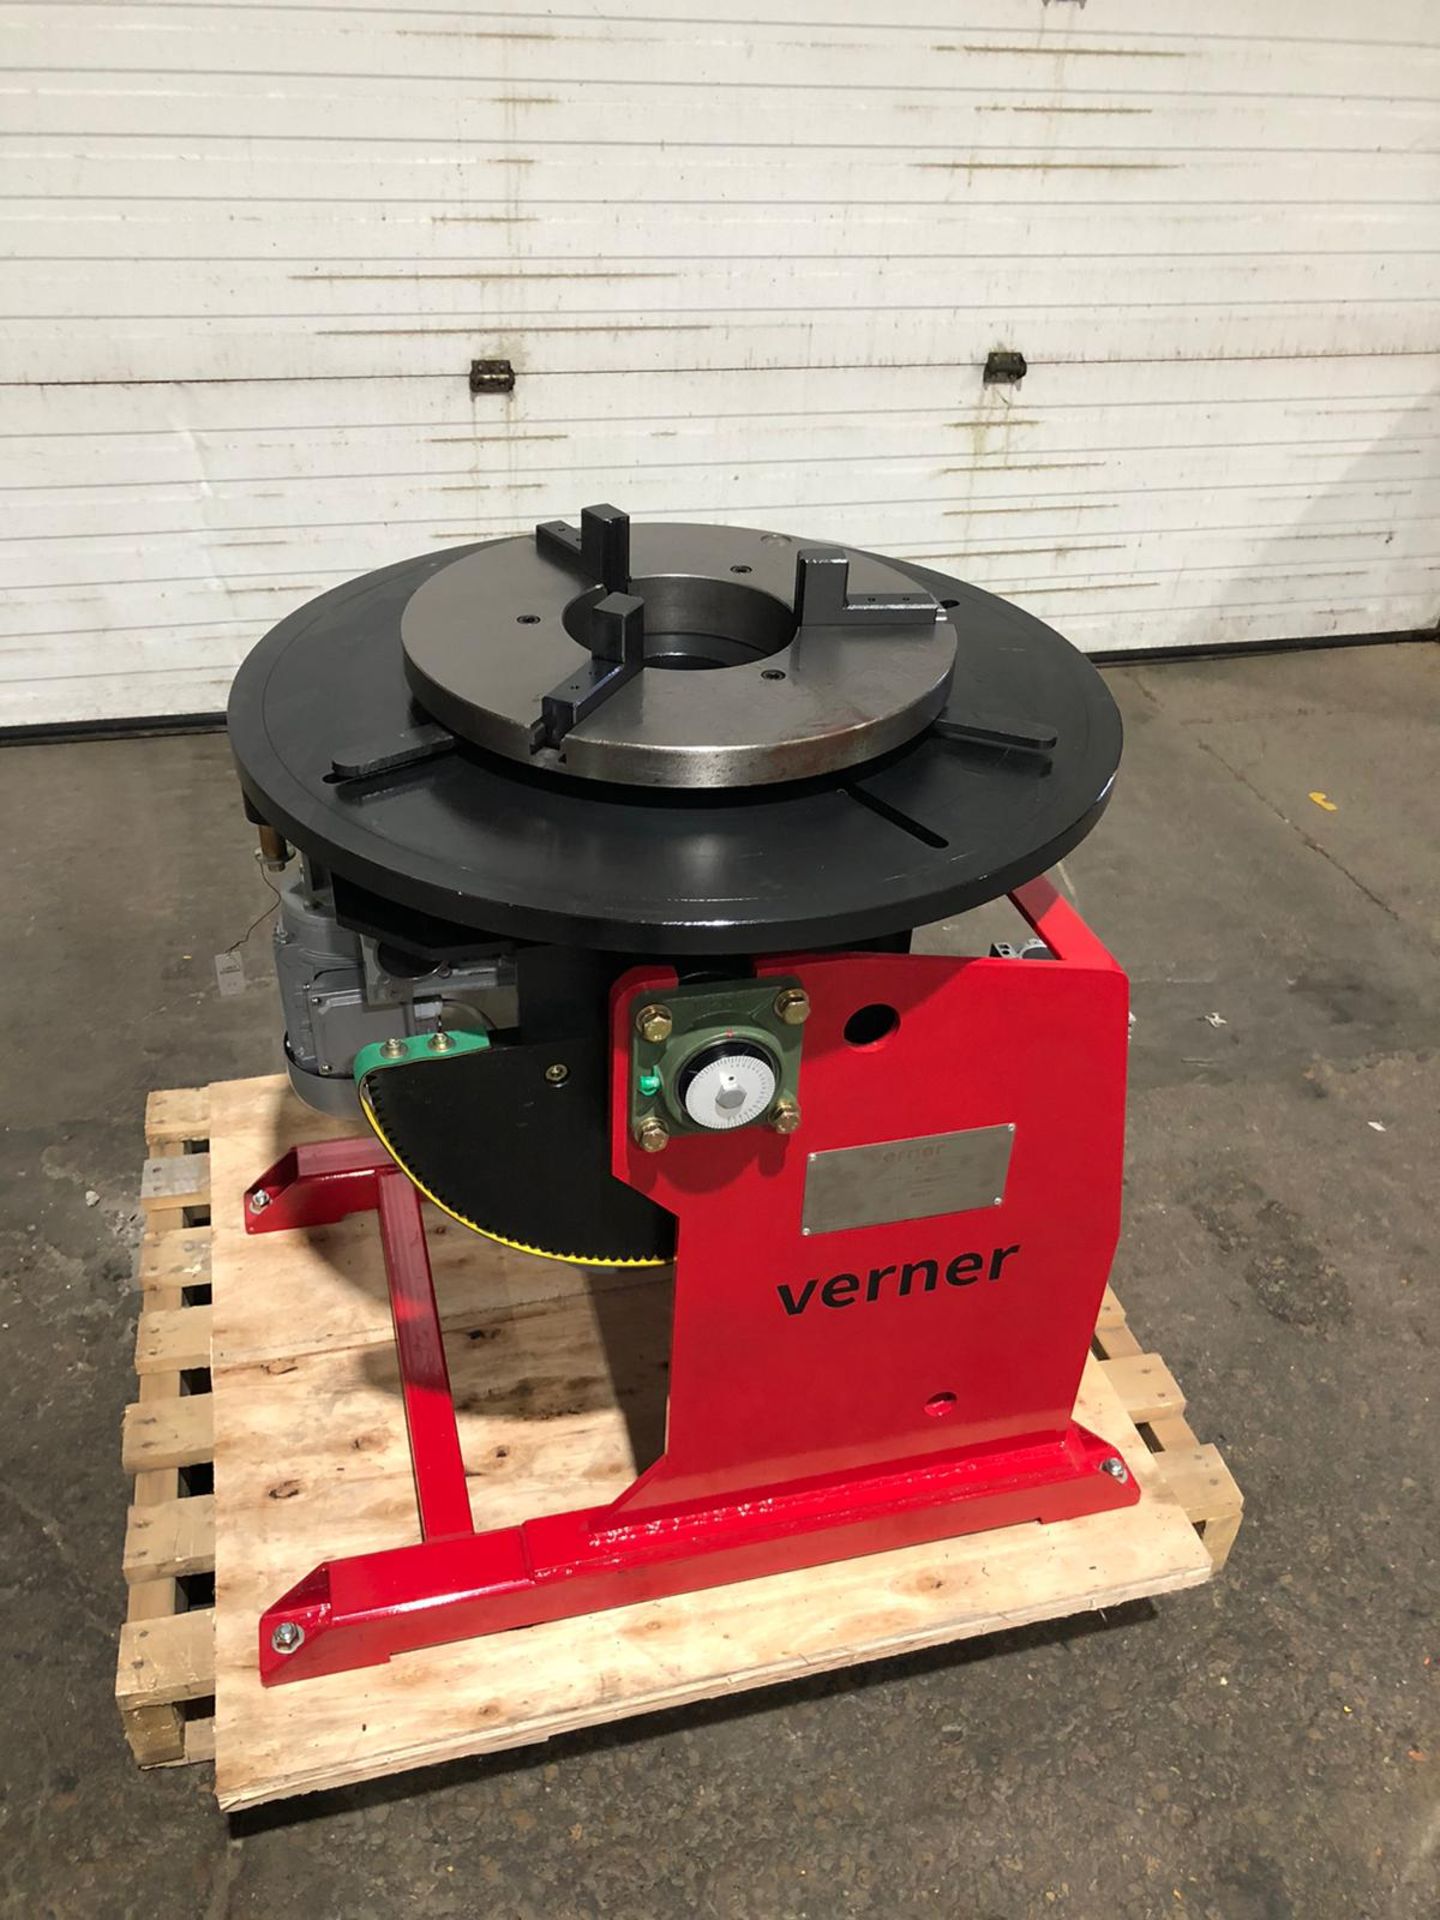 Verner model VD-1250 WELDING POSITIONER 1,250lbs capacity with 3-Jaw Clamping Chuck tilt and